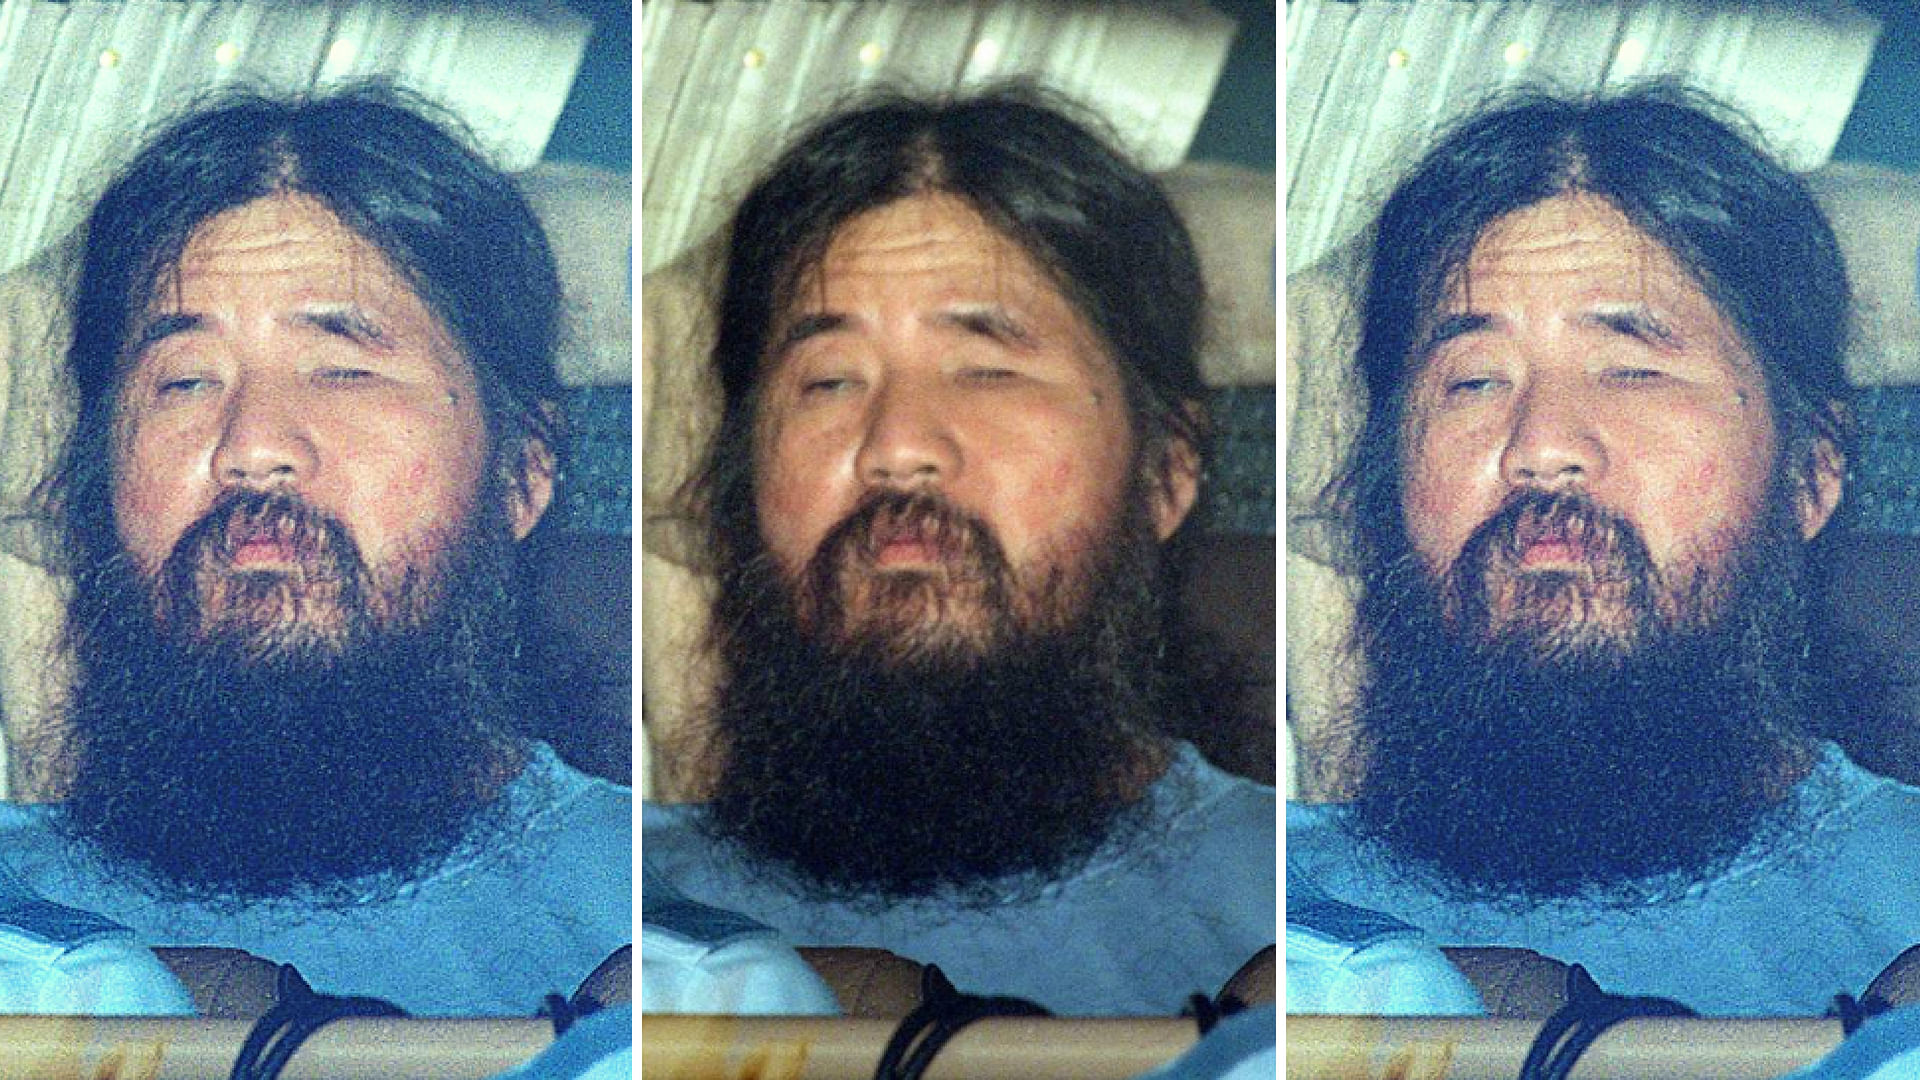 The former leader of Aum and several other members of the Japanese doomsday cult carried out a deadly sarin gas attack on the Tokyo subway in 1995.